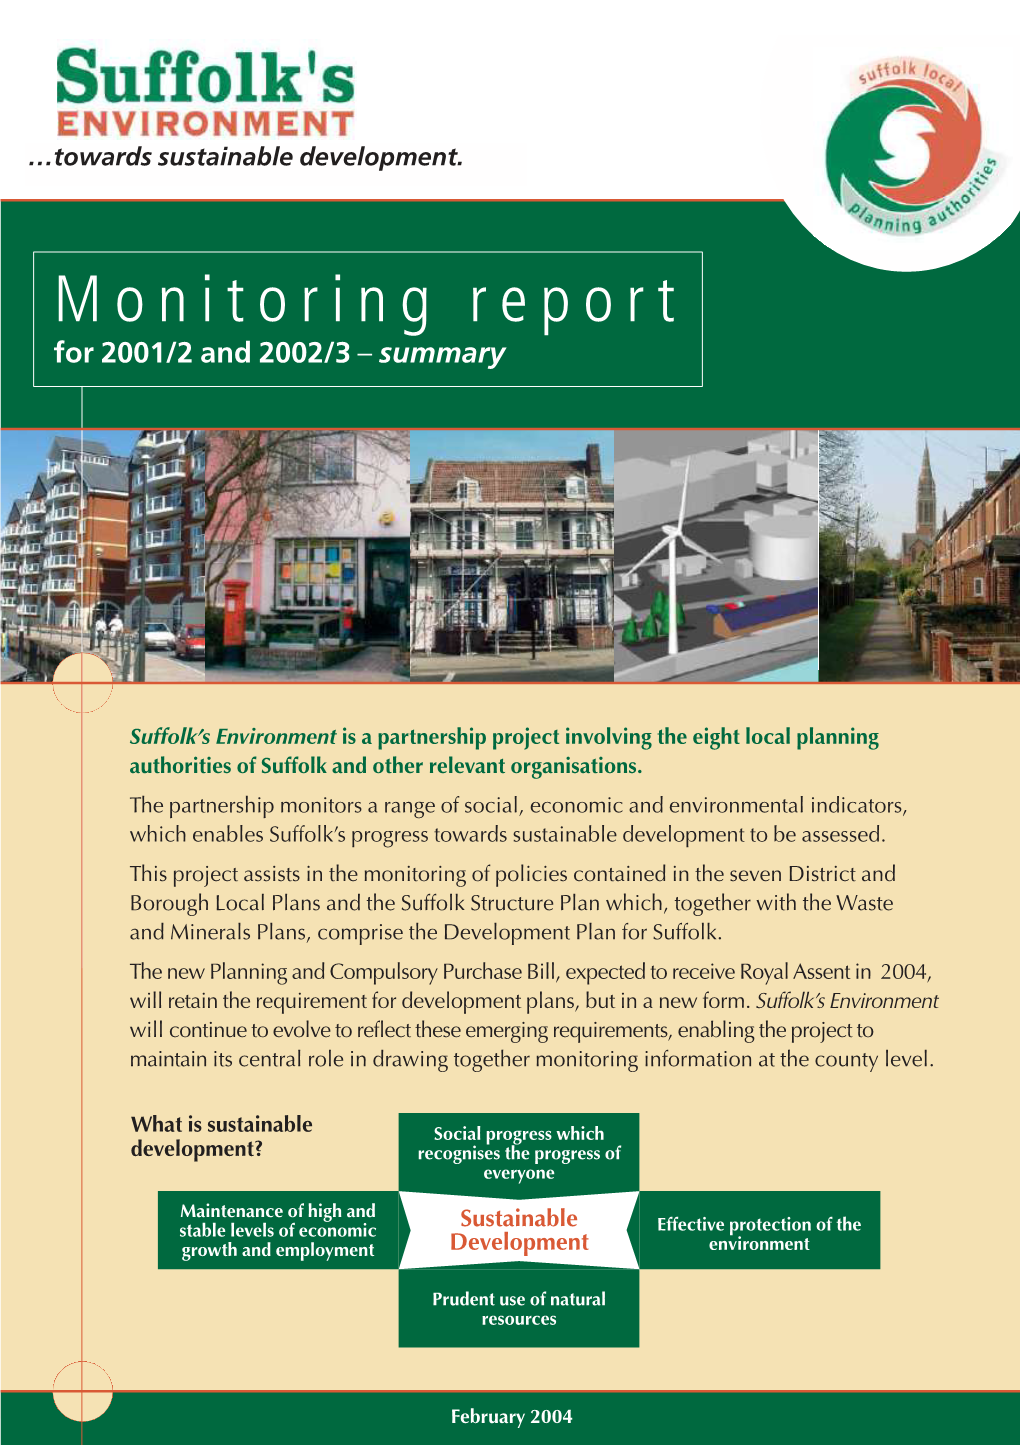 Monitoring Report for 2001/2 and 2002/3 – Summary